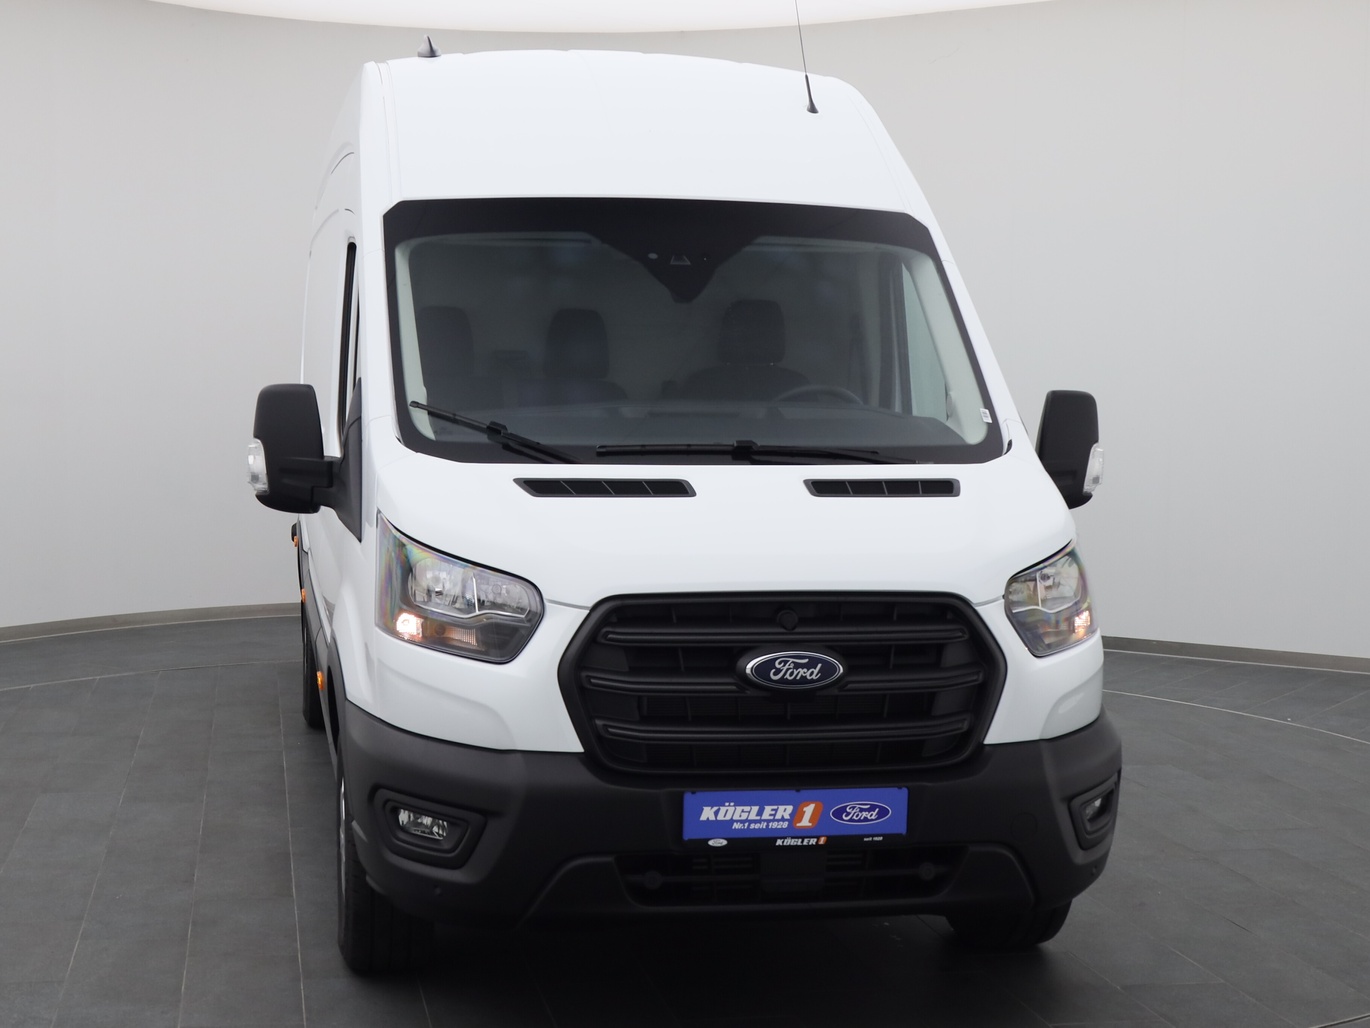  Ford Transit Kasten 350 L4H3 Trend 130PS HA in Weiss 